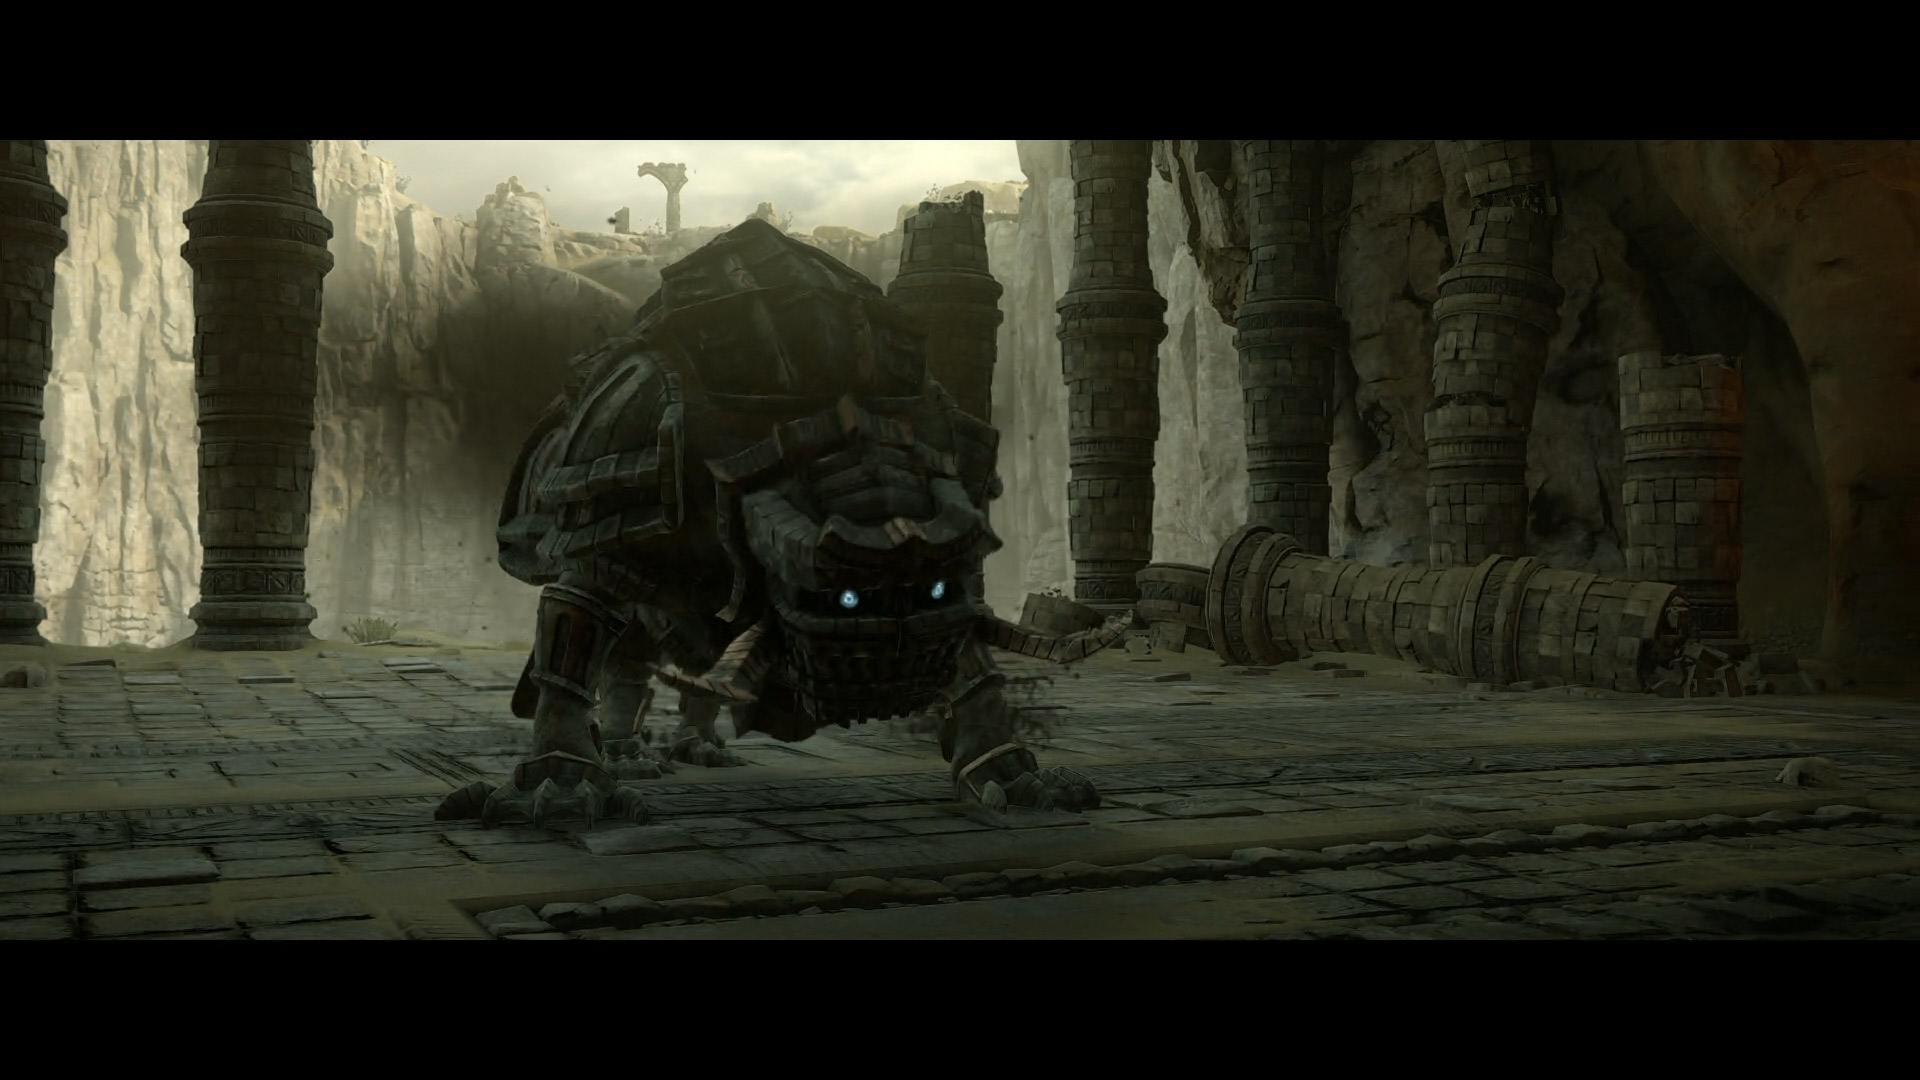 incredible screenshot of shadow of the colossus on